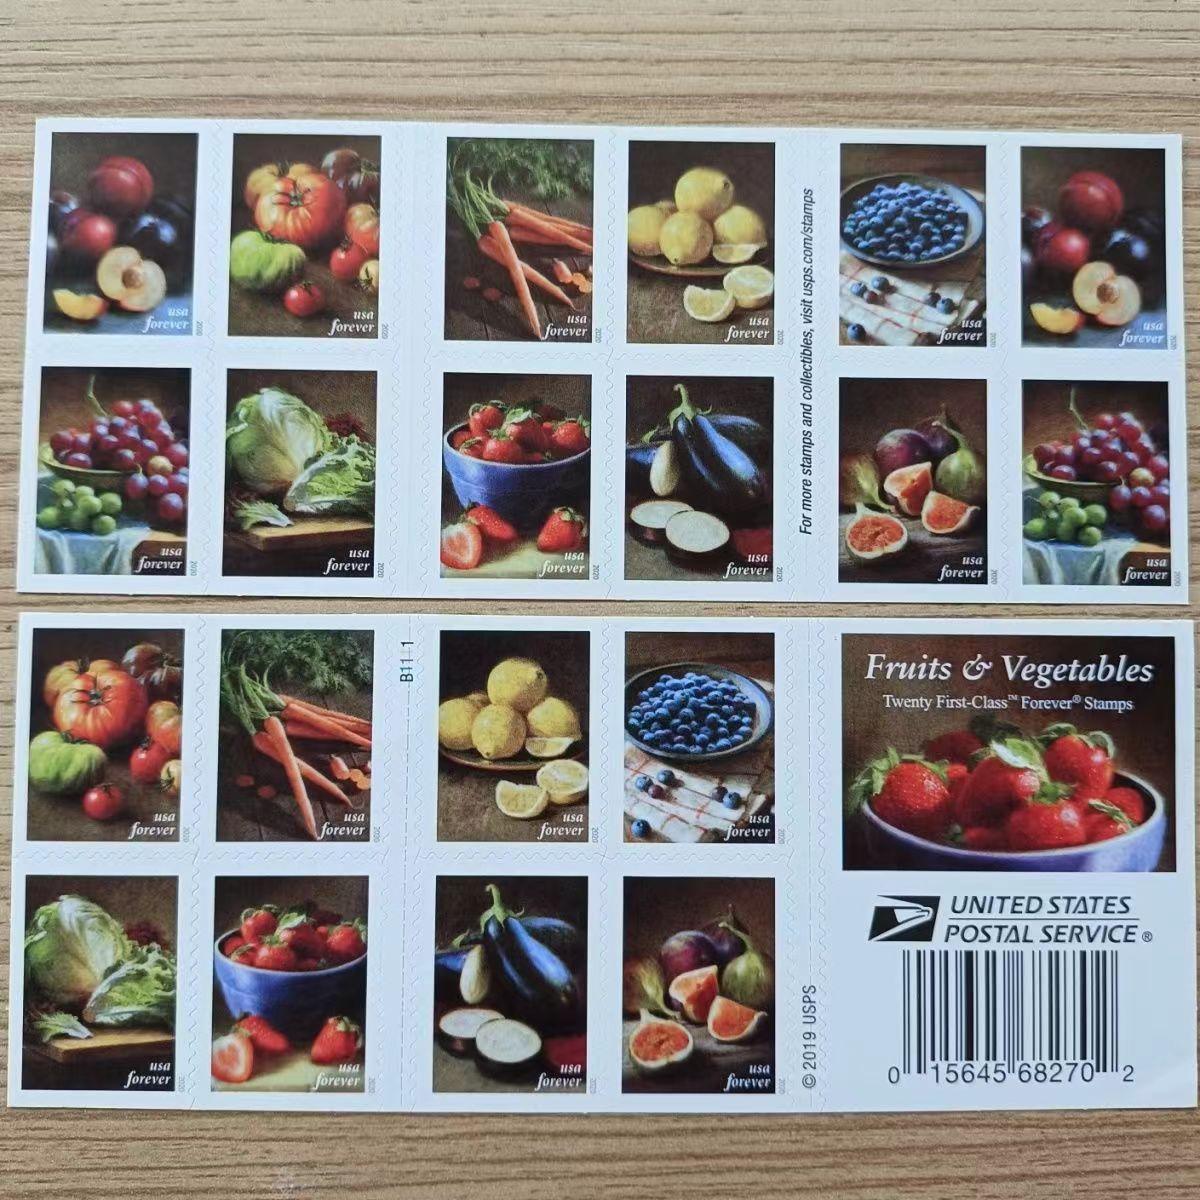 A sheet of Fruits and Vegetables 2020 - 5 Booklets / 100 Pcs stamp booklets featuring colorful images of various fruits and vegetables on a wooden table.